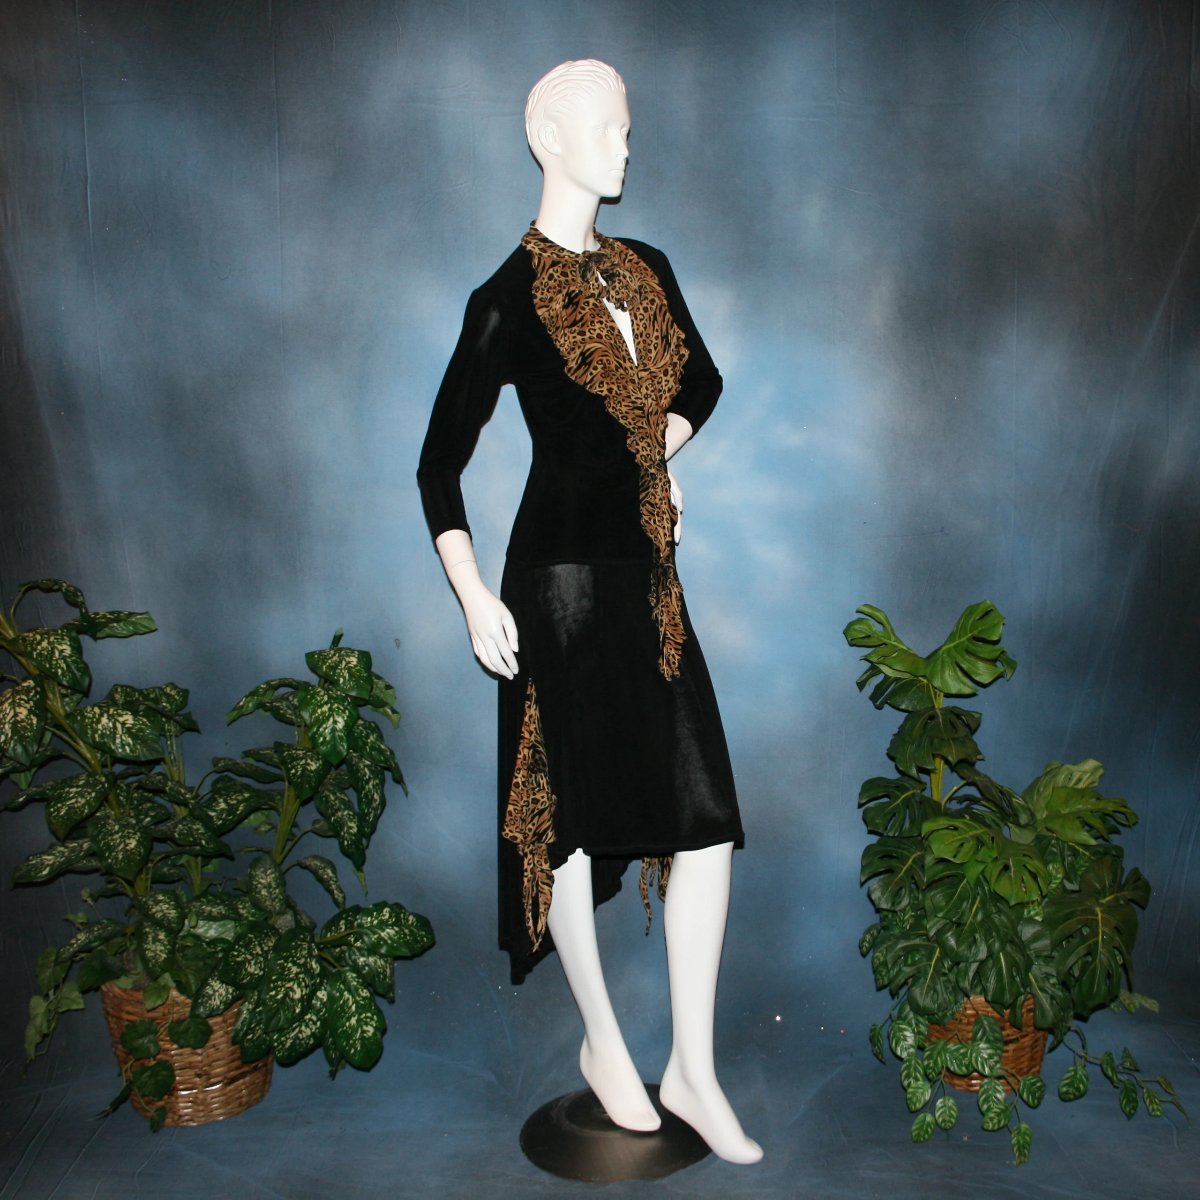 right side view of Black ballroom dance top with cheetah ruffly neck & tie of luxurious black slinky and black Latin/rhythm flaired skirt with cheetah print slinky ruffly accents, which drapes down longer in the back. Great set for ballroom teachers!Tie on top can be worn open or closed.